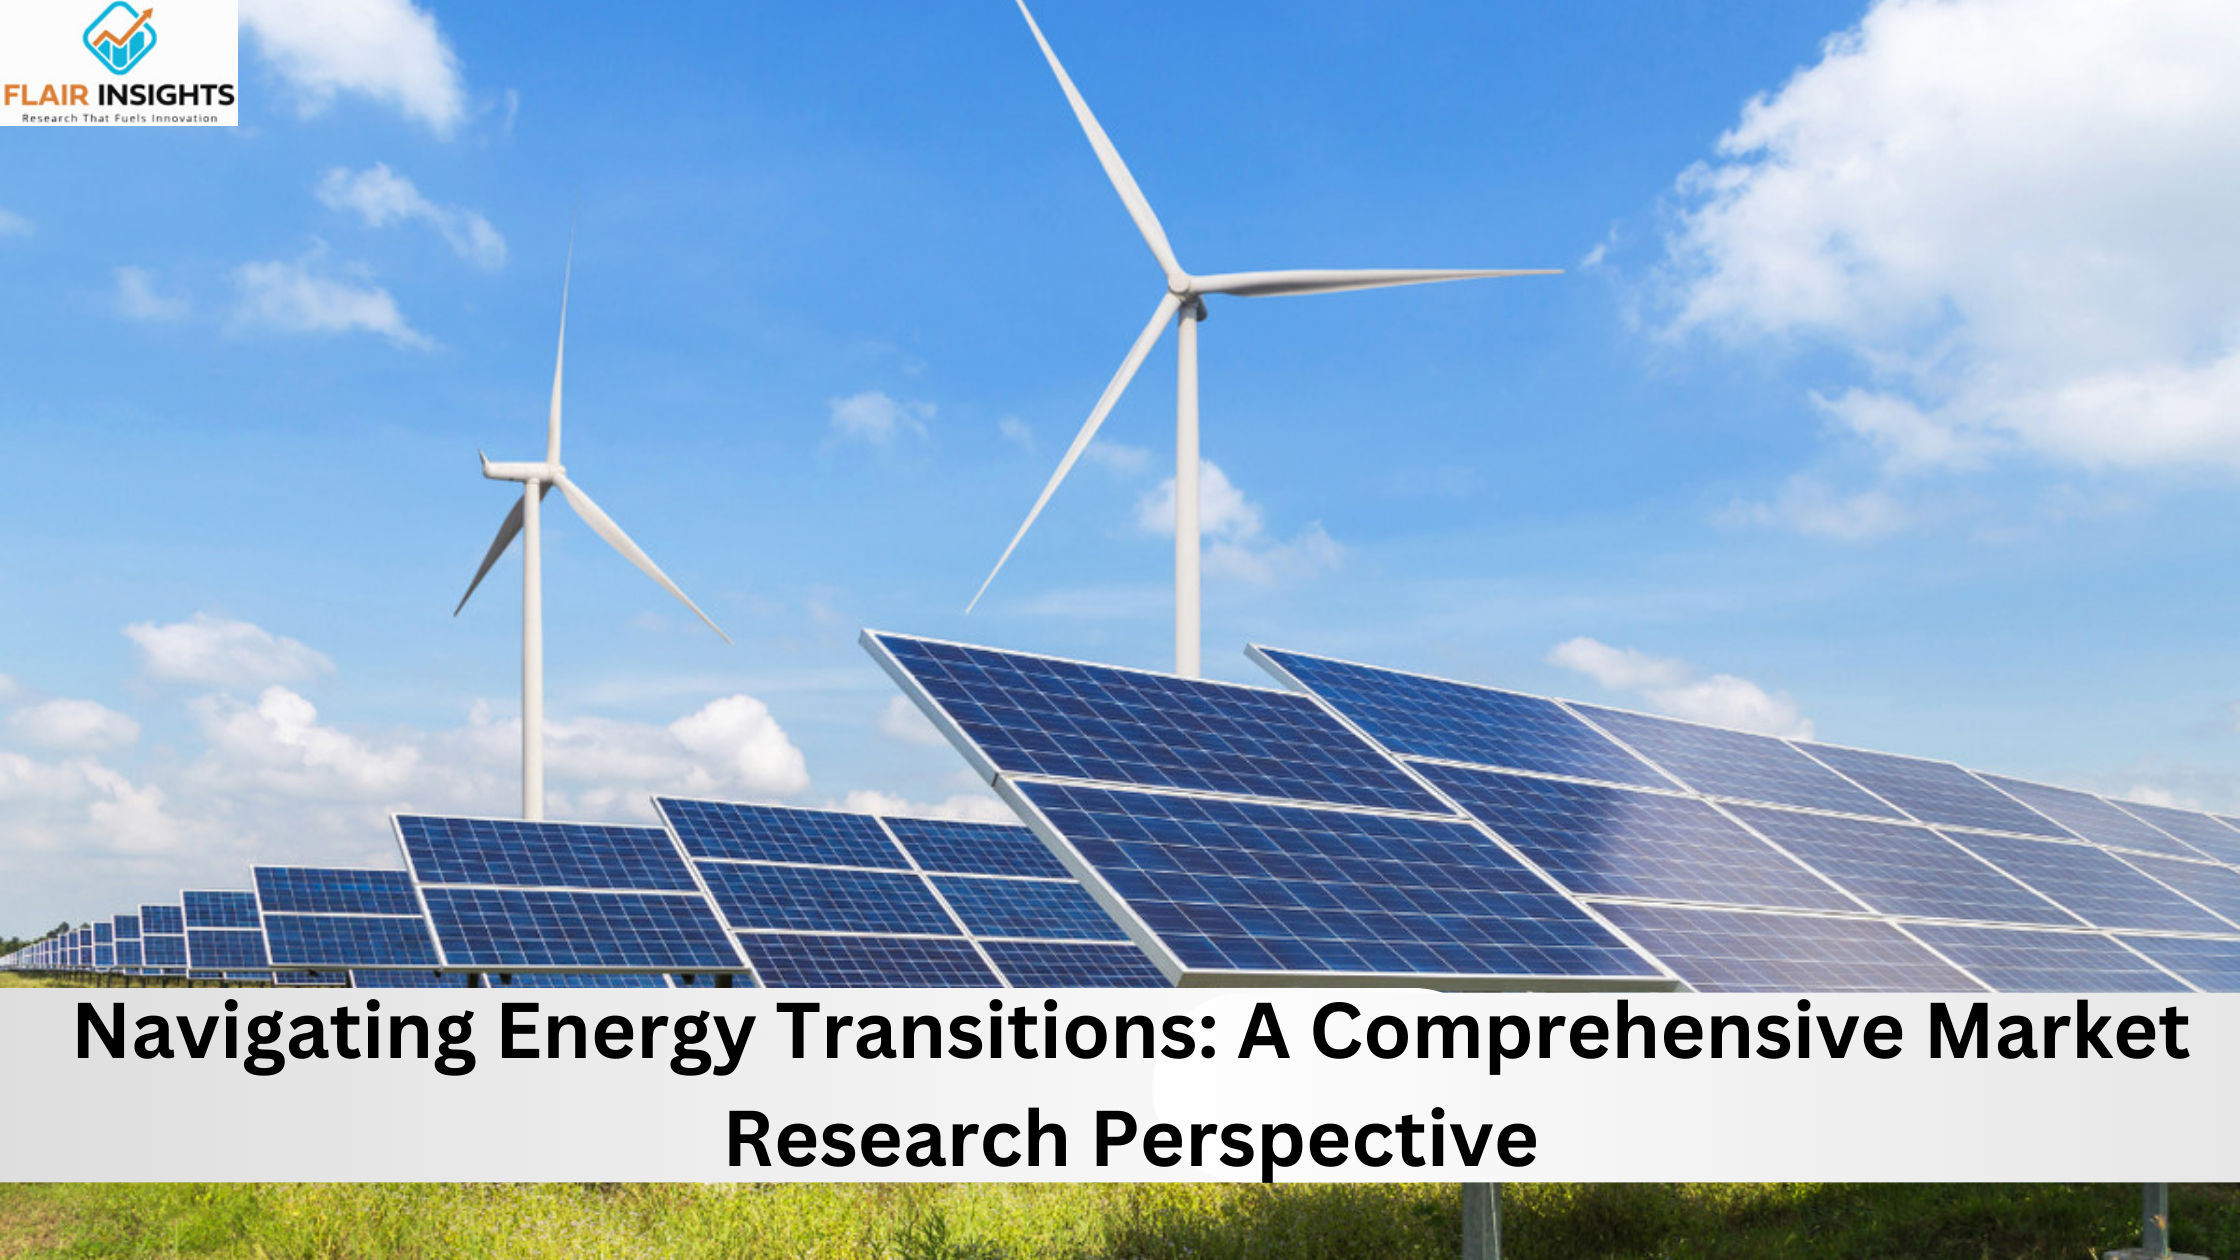 Navigating Energy Transitions: A Comprehensive Market Research Perspective